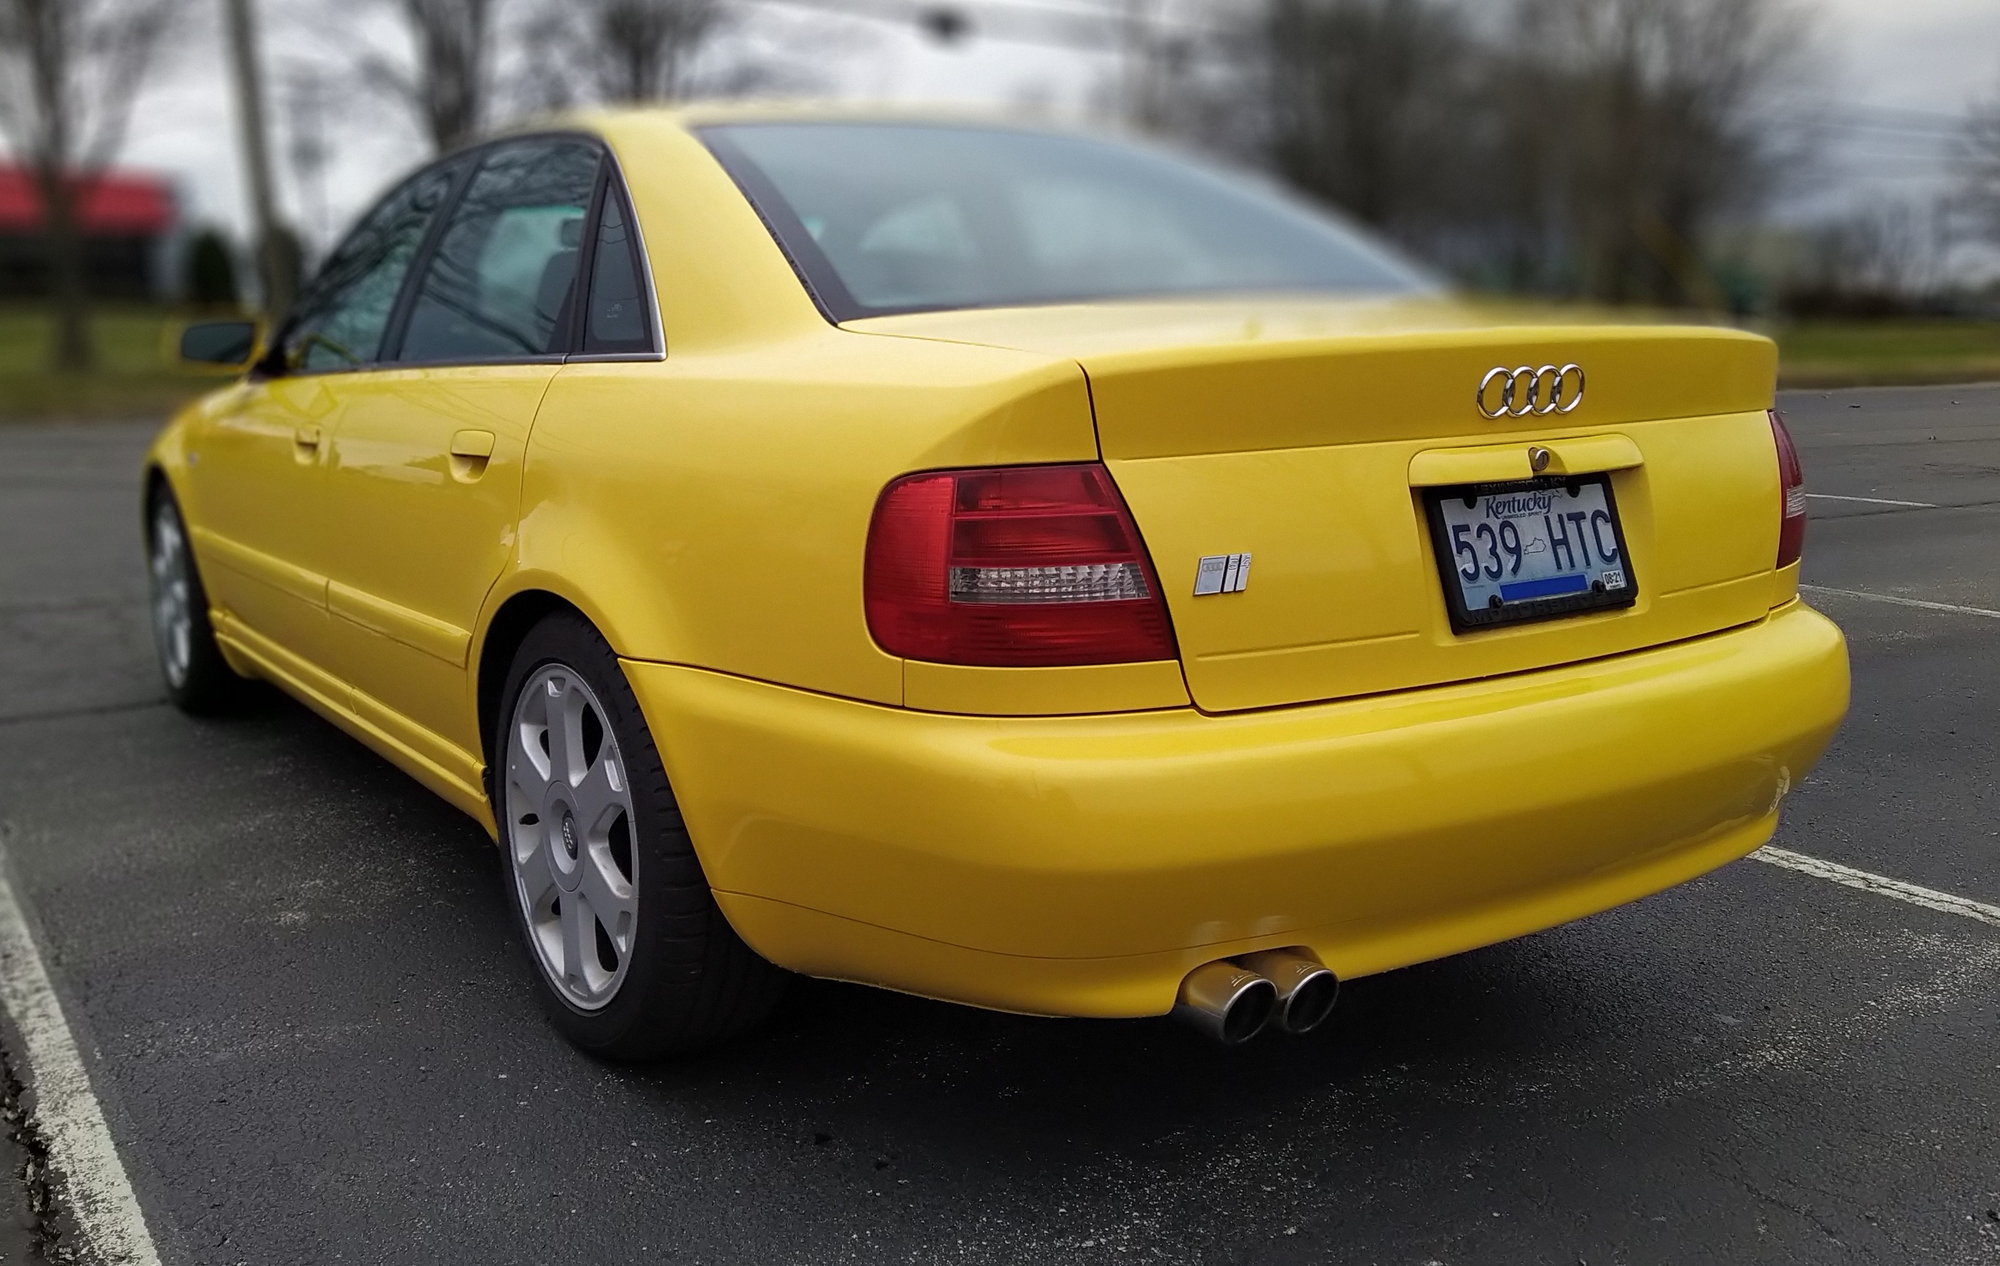 2001 Audi S4 - 2001 Imola Yellow Audi S4 for sale - Used - VIN WAURD68D11A021857 - 127,650 Miles - 6 cyl - AWD - Manual - Sedan - Yellow - Louisville, KY 40299, United States